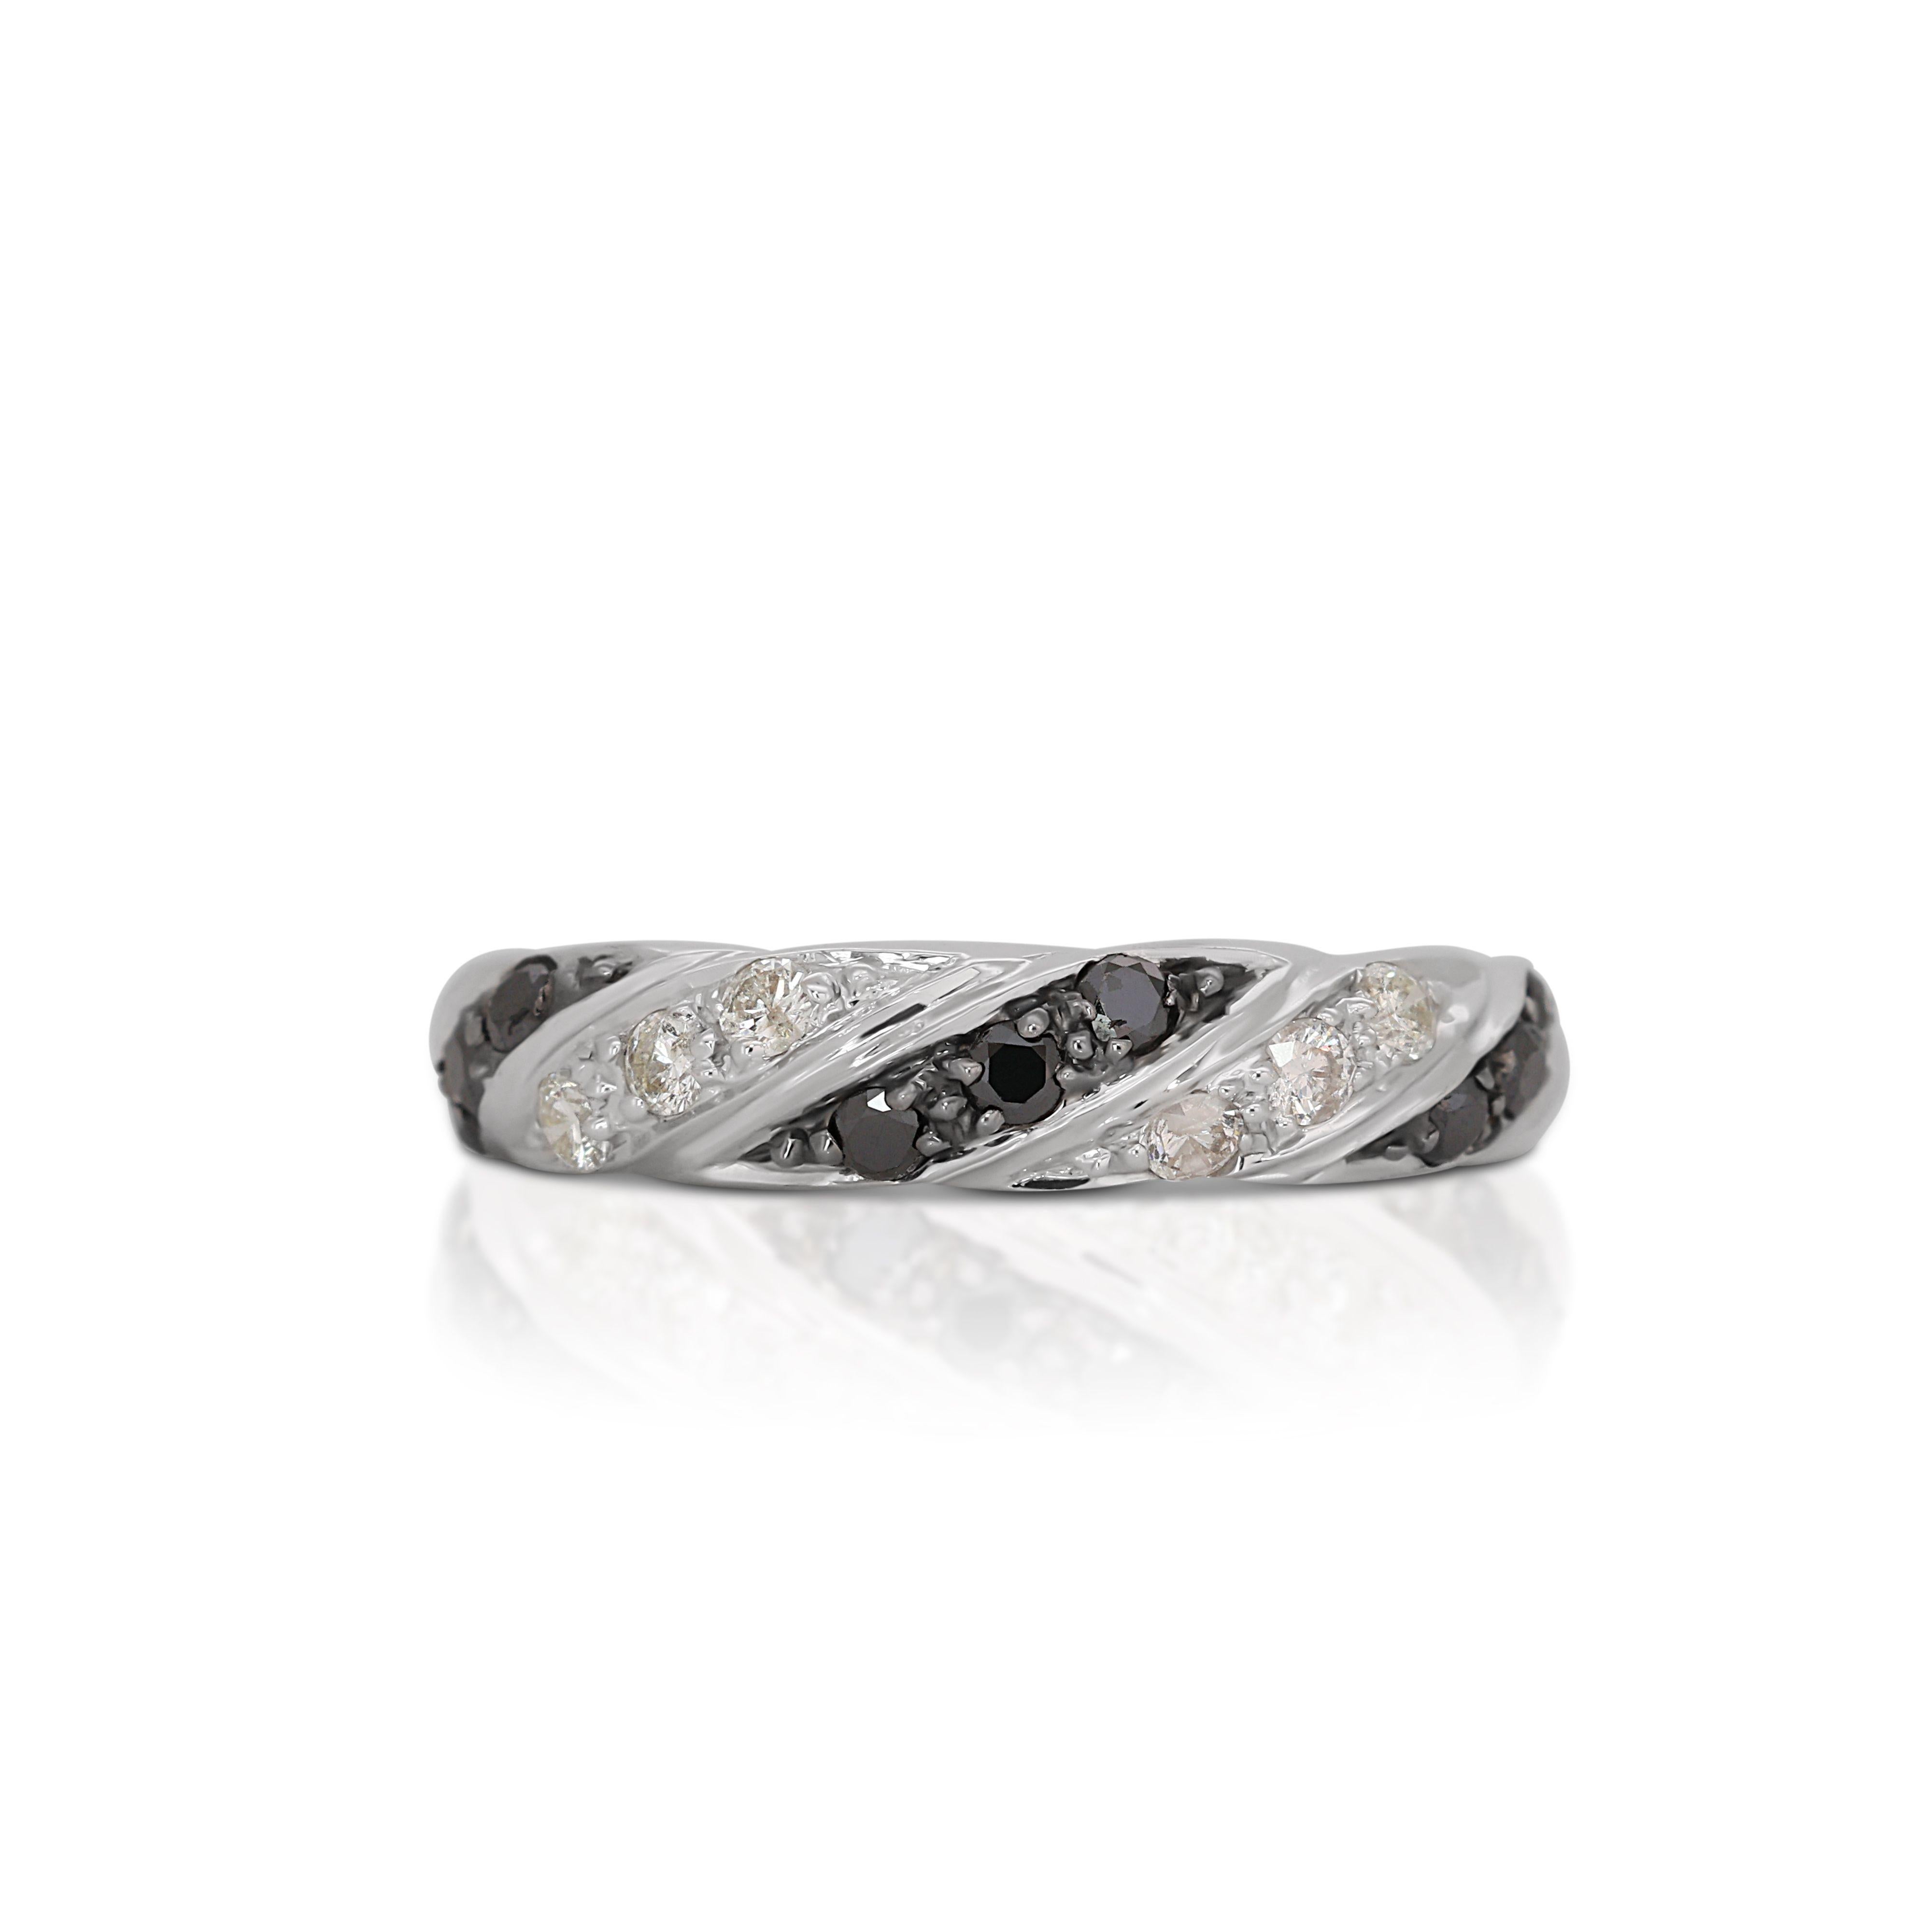 The band of the ring is meticulously crafted, offering a sleek and polished finish that not only enhances the diamond's radiance but also ensures the ring is comfortable to wear. The choice of 18K white gold adds a touch of modernity and luxury to